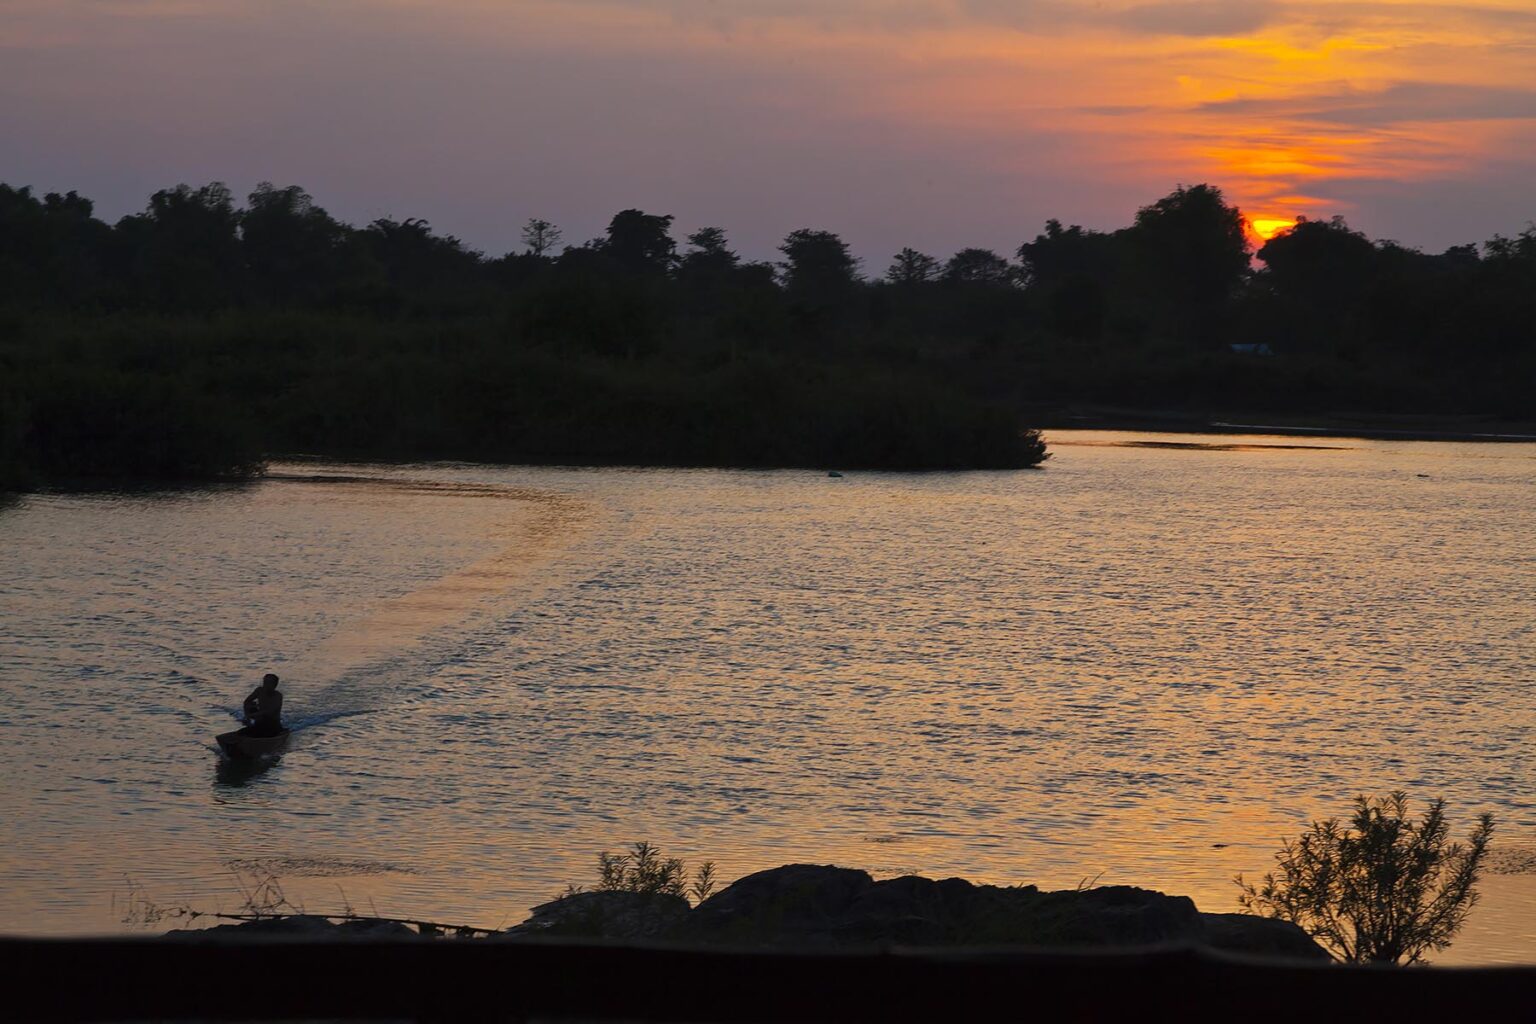 Sunset on DON DET ISLAND in the 4 Thousand Islands Area (Si Phan Don) of the MEKONG RIVER - SOUTHERN, LAOS